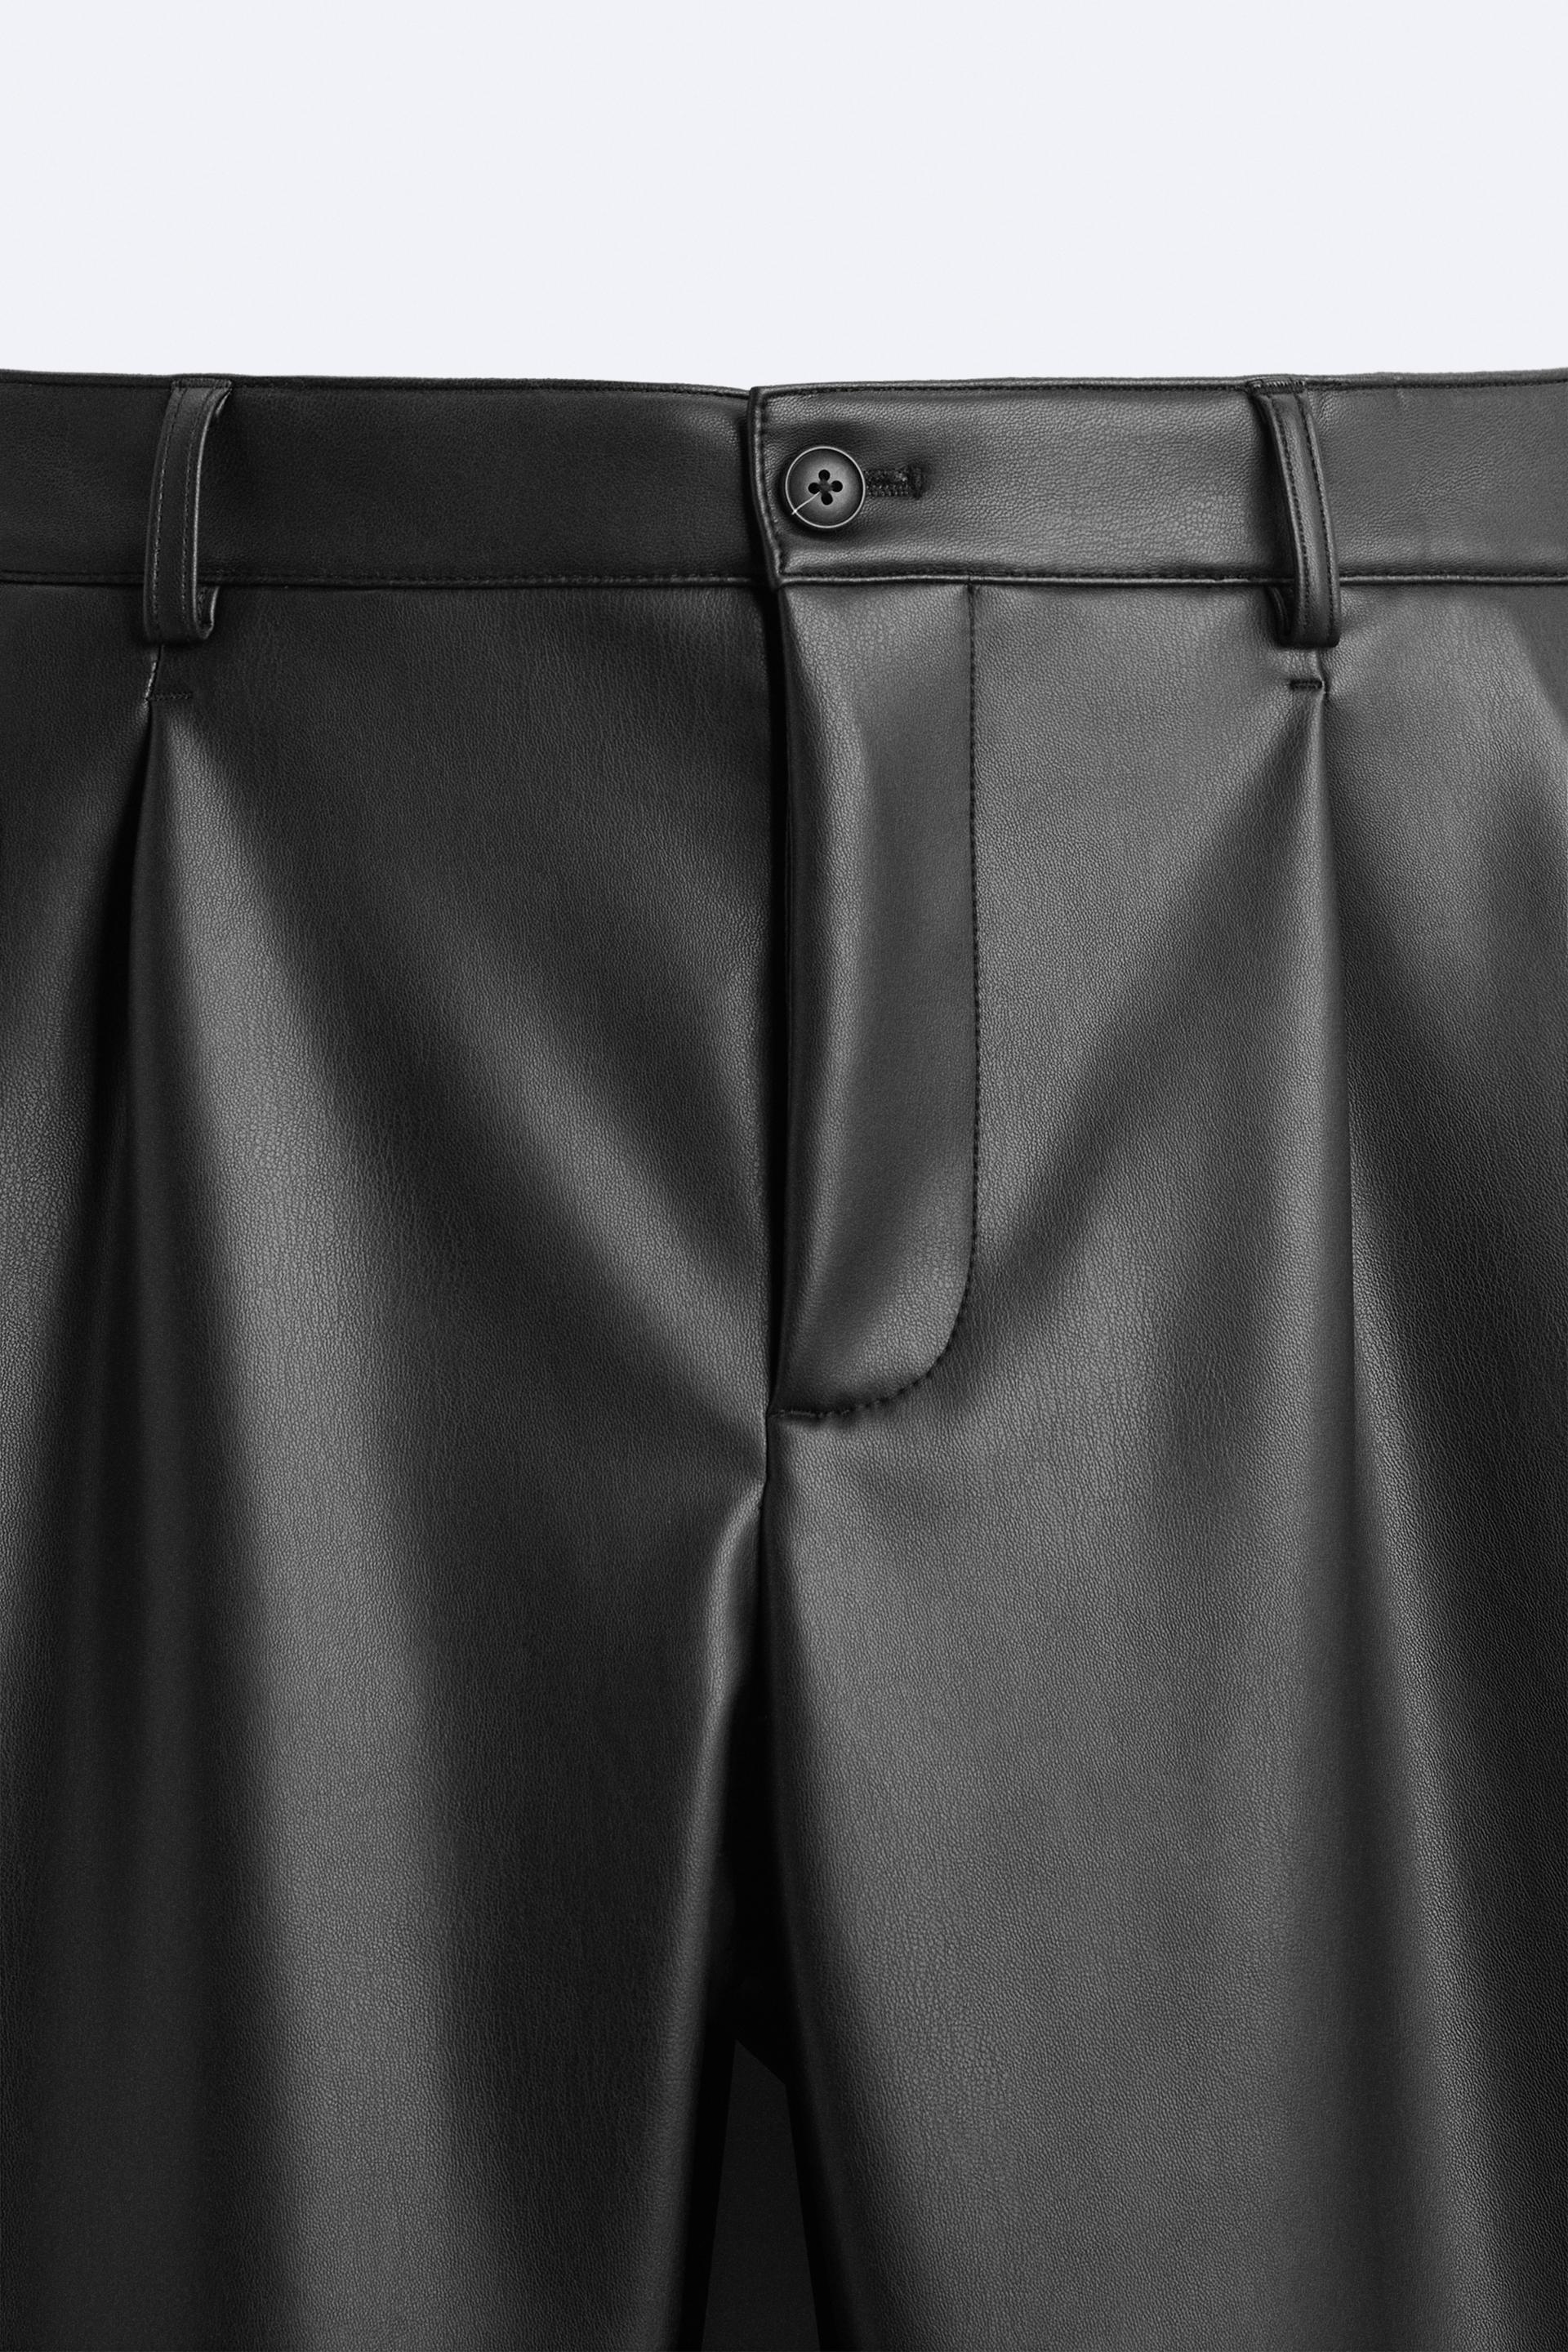 Zara + H&M + MNG + F21 + UNIQLO BHUTAN, ZARA 🤎 FAUX LEATHER TROUSERS  🏷️3590/- Sizes:XS-L MRP incl. of all taxes High-waist trousers with front  pockets. Front zip fly and